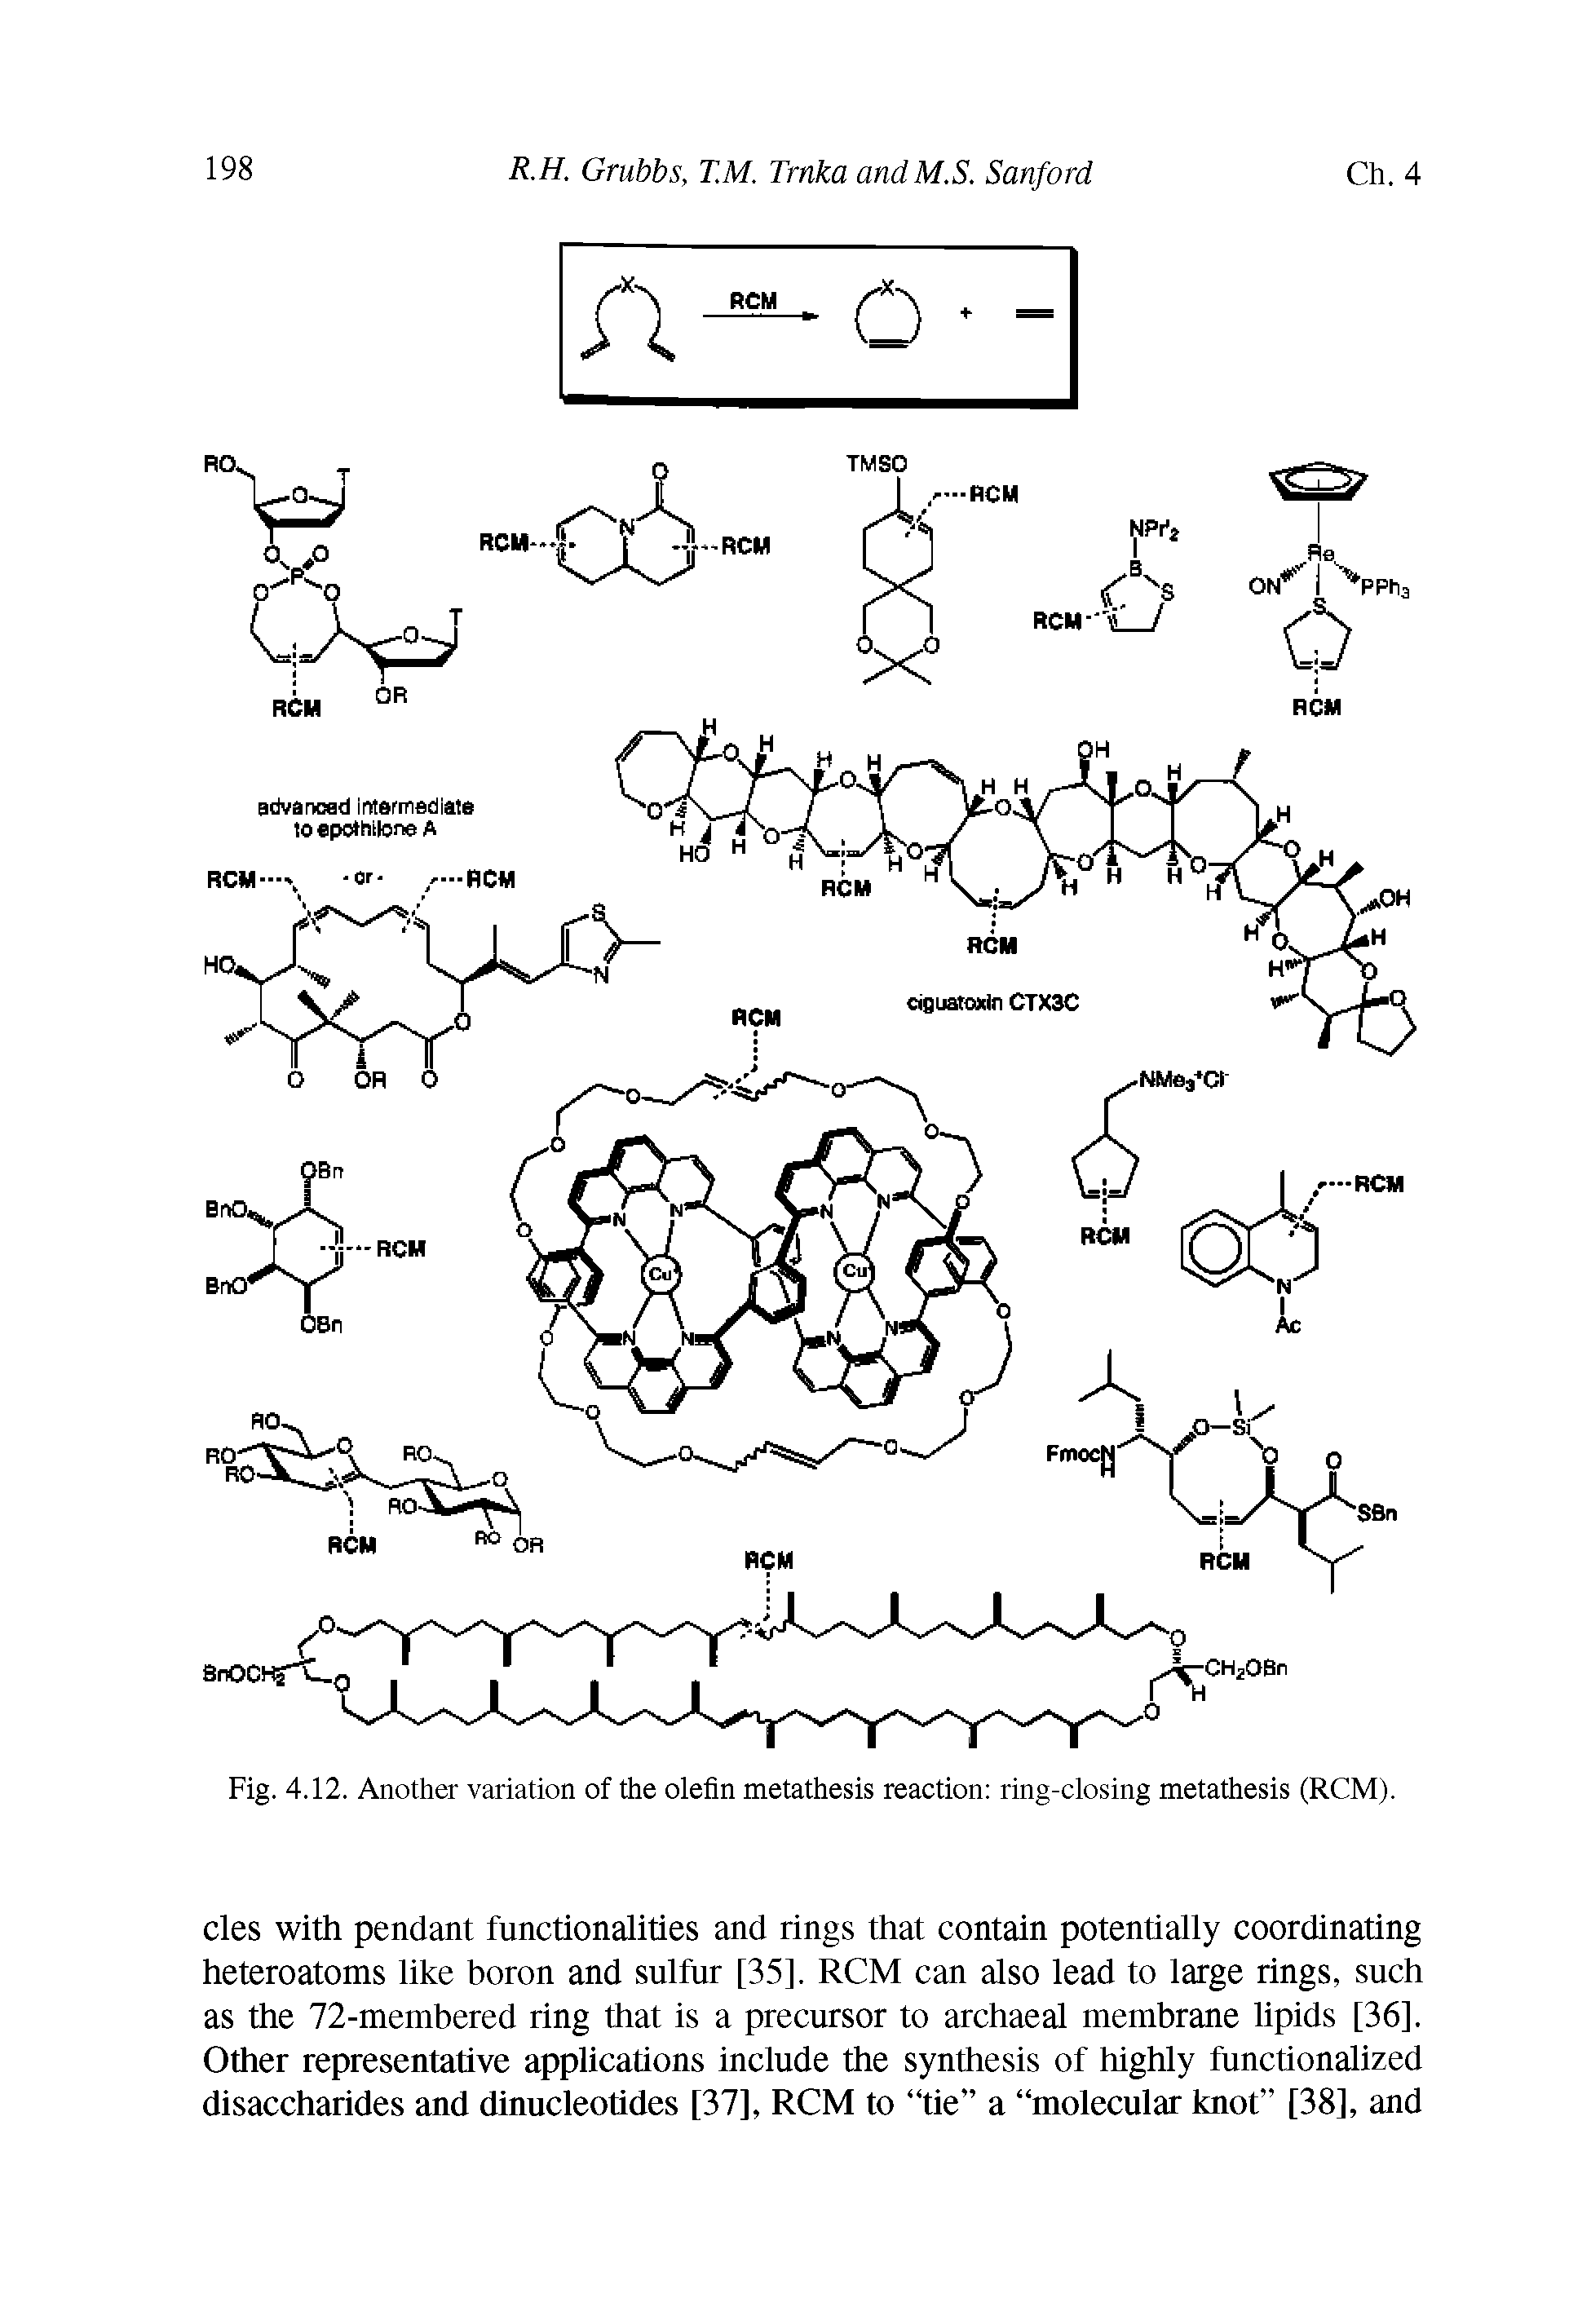 Fig. 4.12. Another variation of the olefin metathesis reaction ring-closing metathesis (RCM).